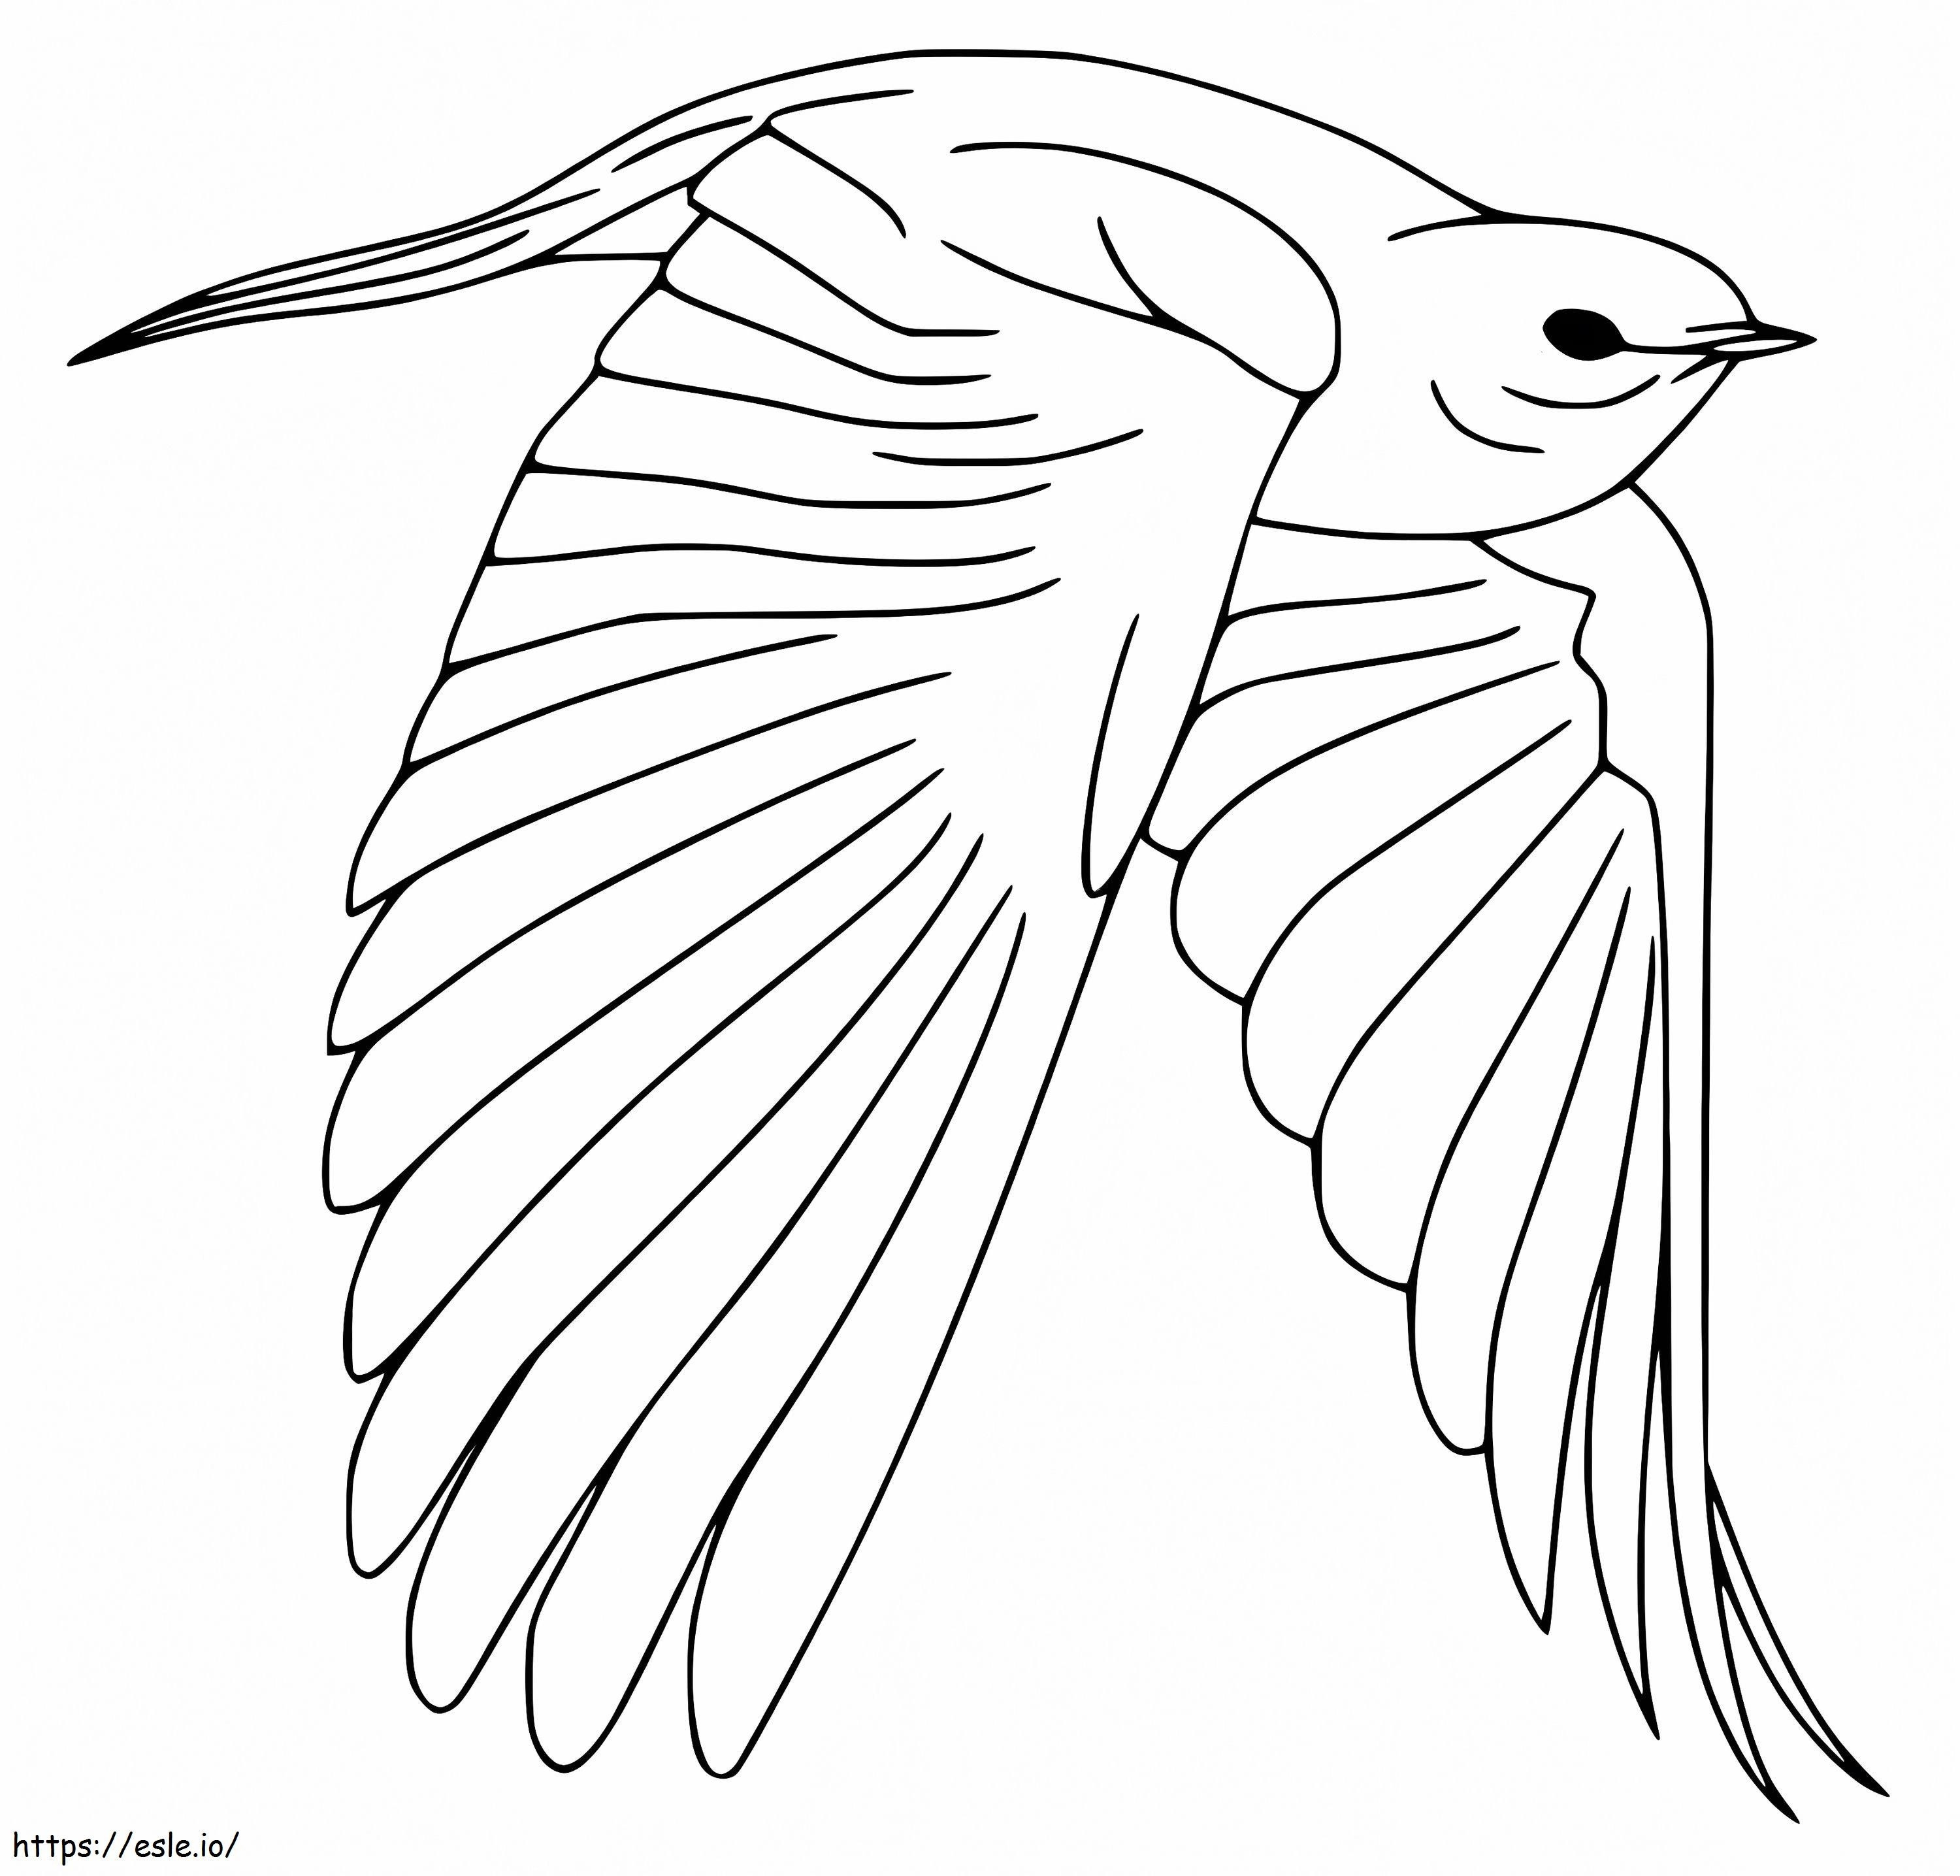 Bluebird Is Flying coloring page